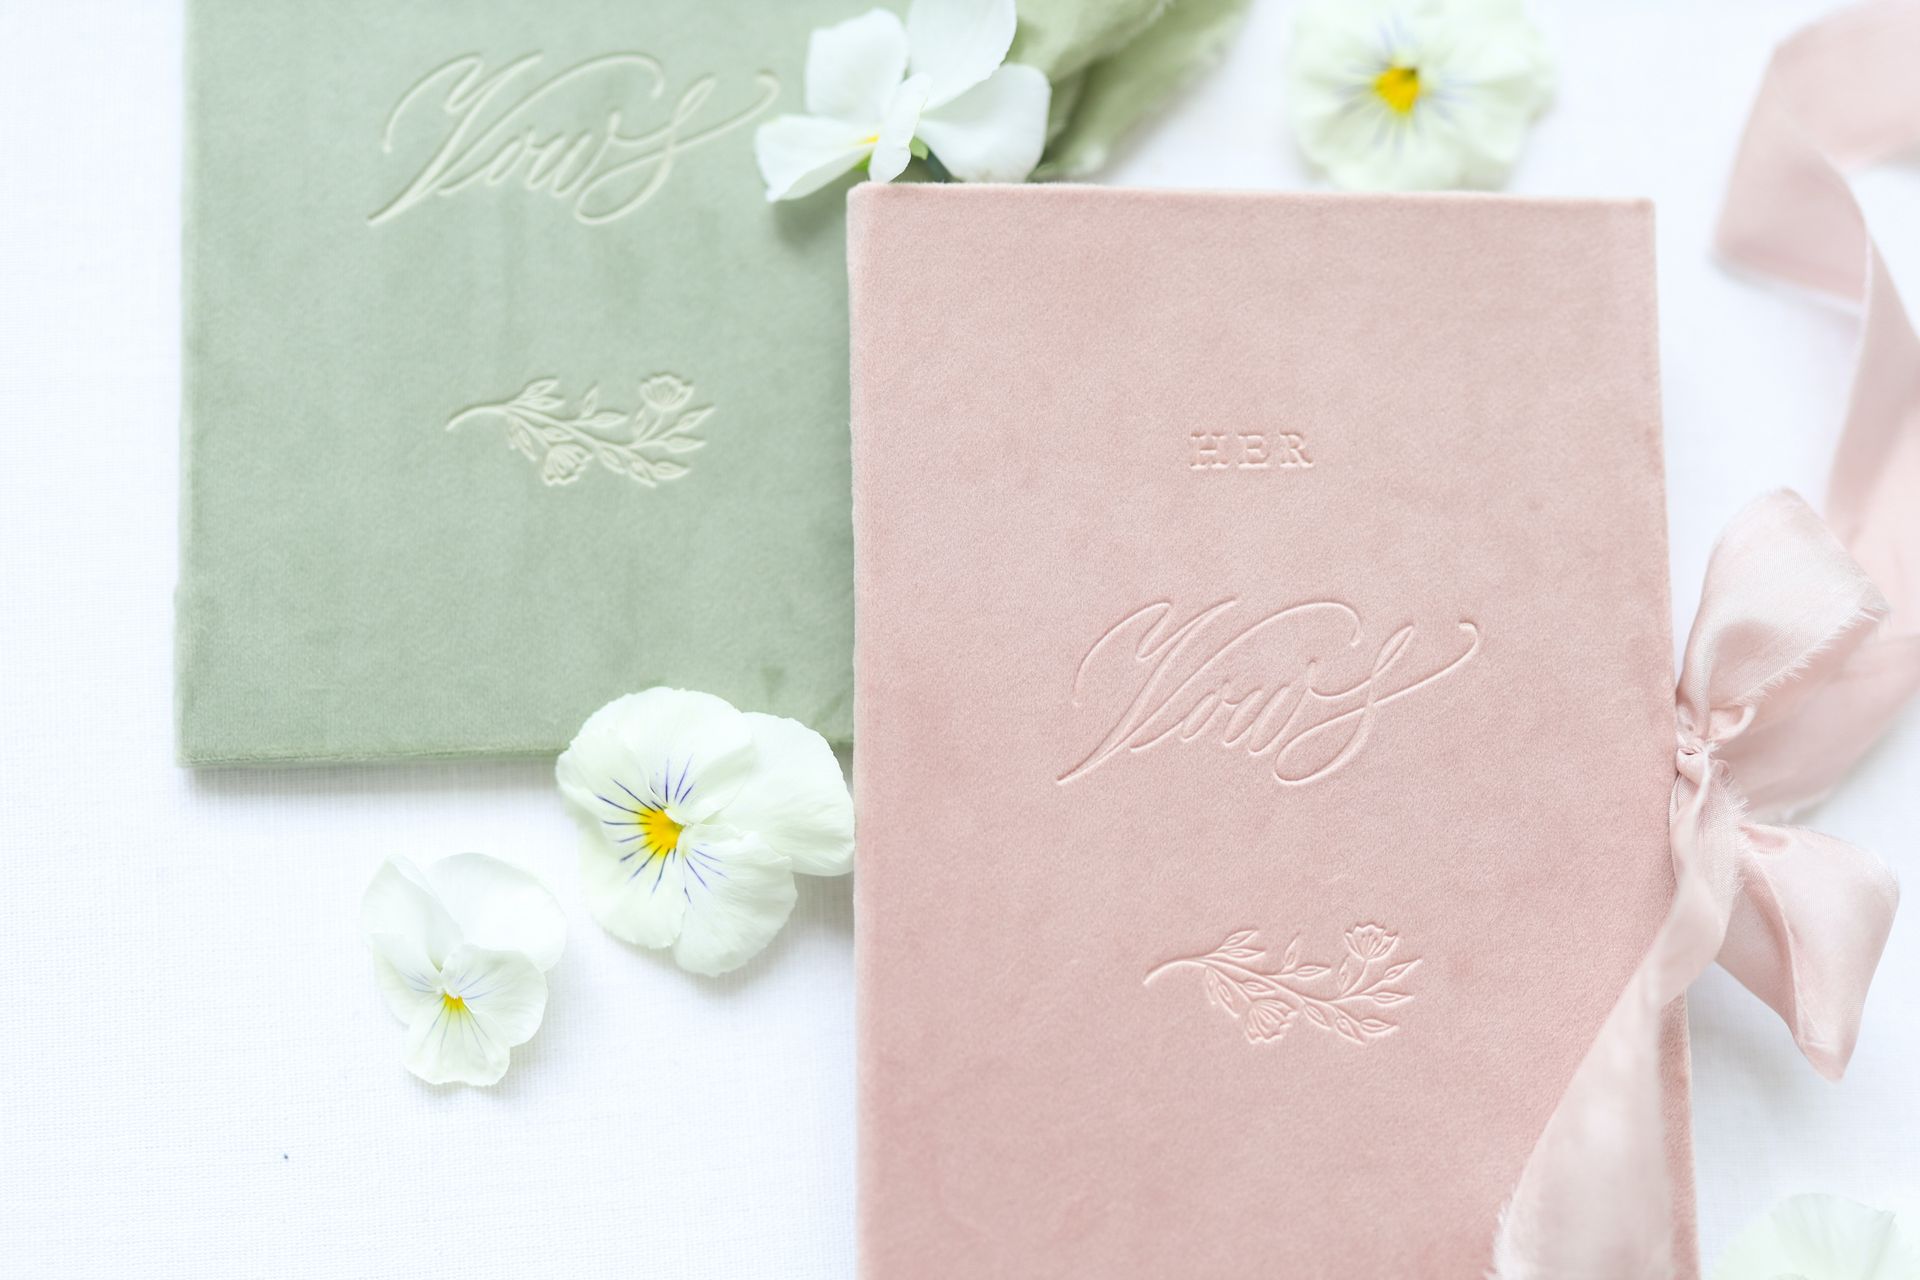 Two books for writing vows - one in pink and one in green, laid on top of a while table with flowers